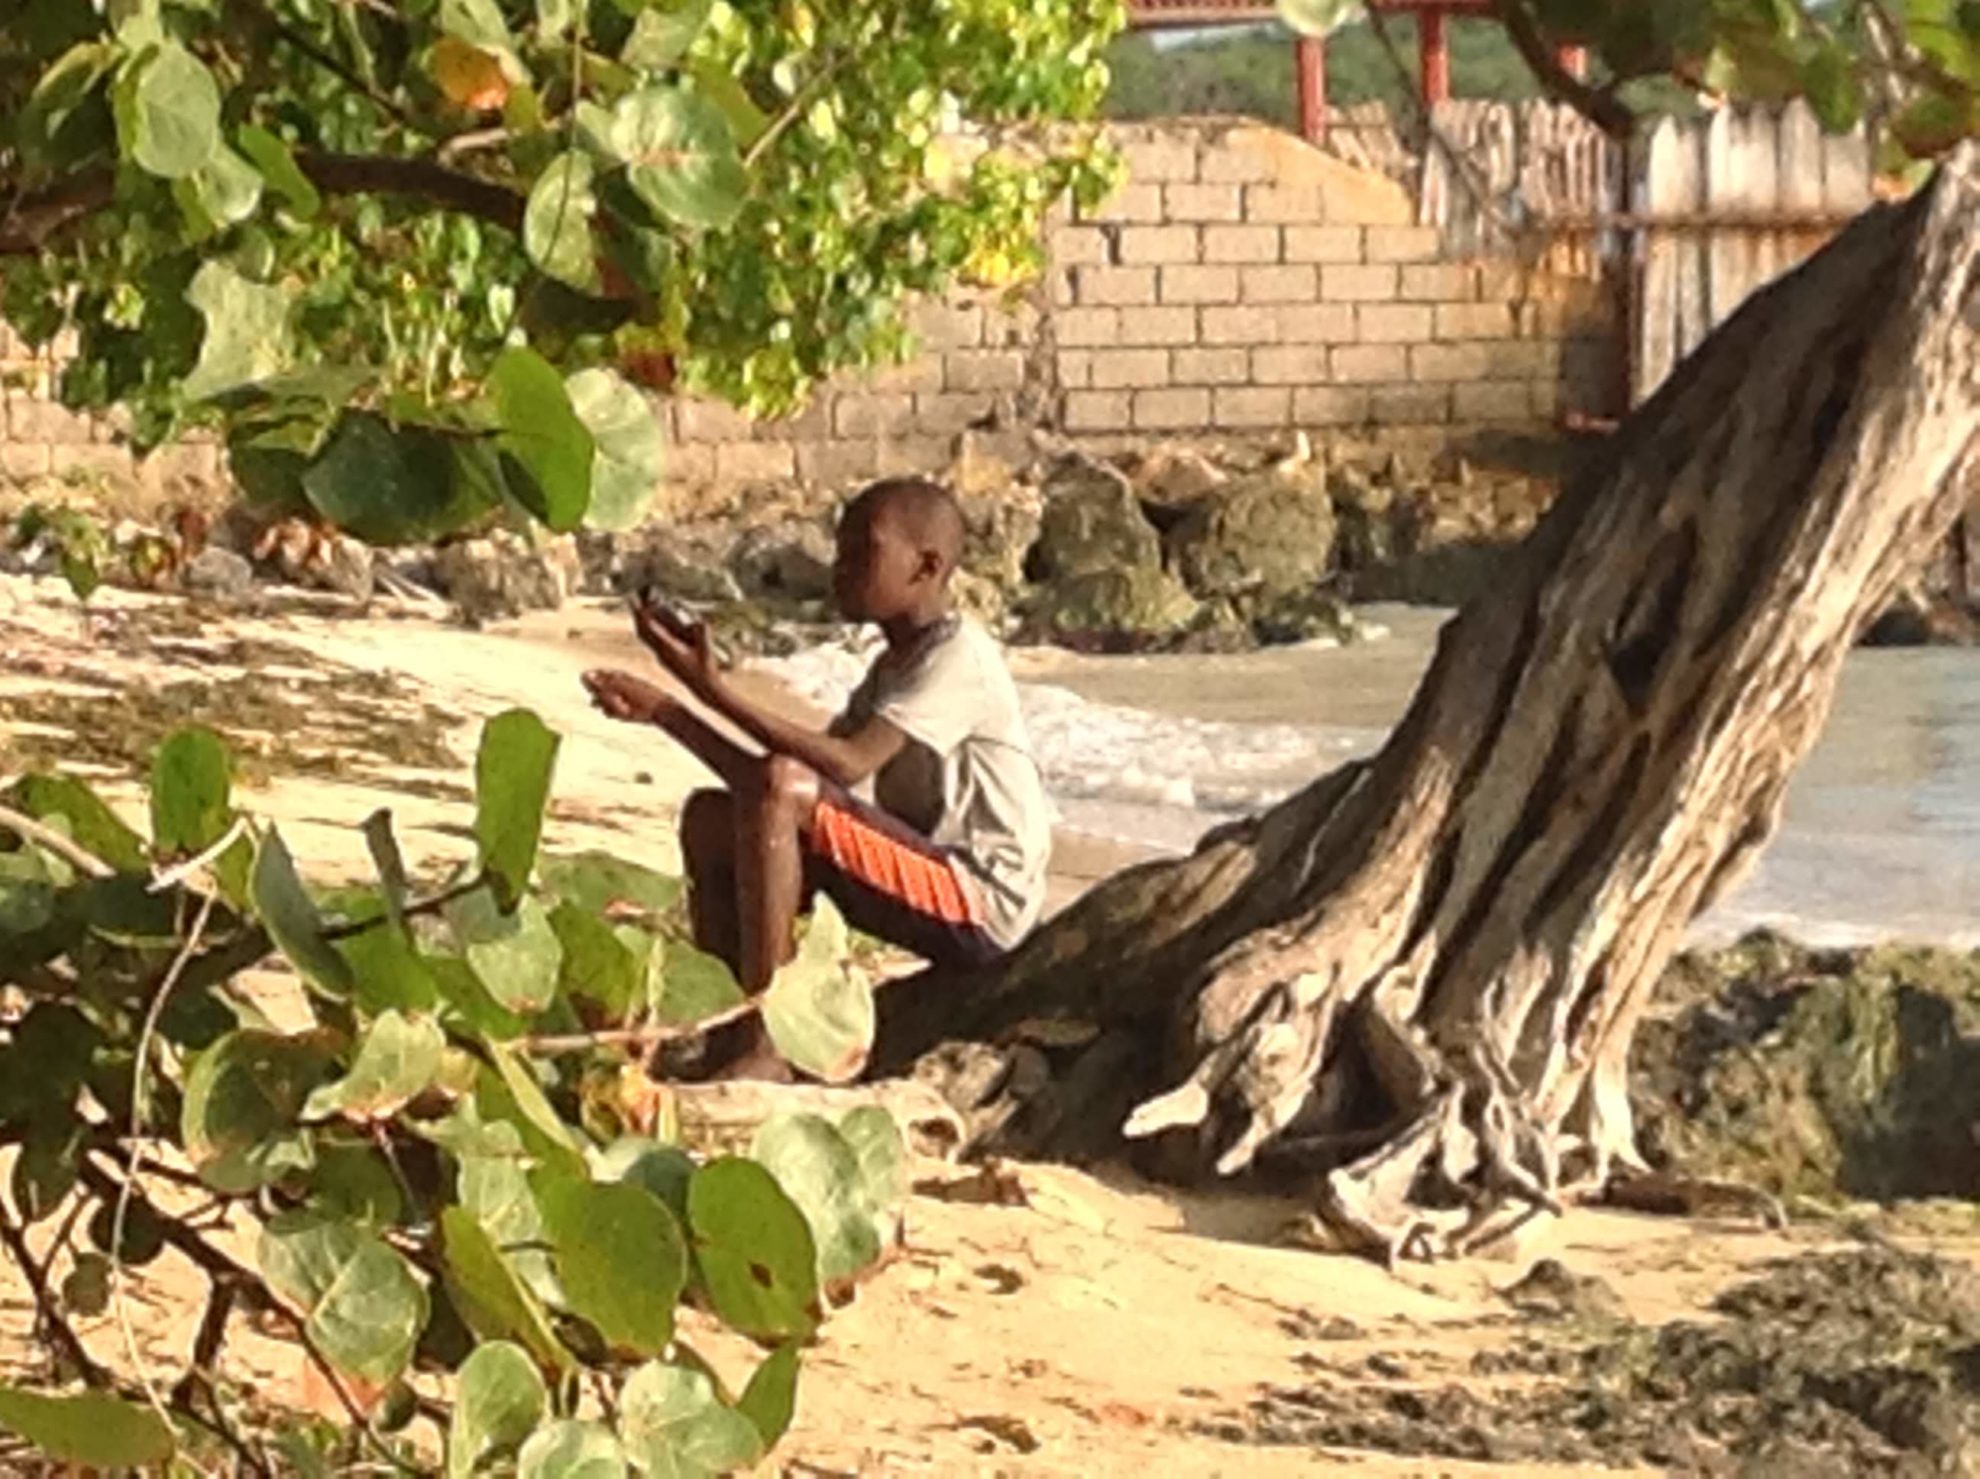 A boy sits on the roots of a tree growing on the beach